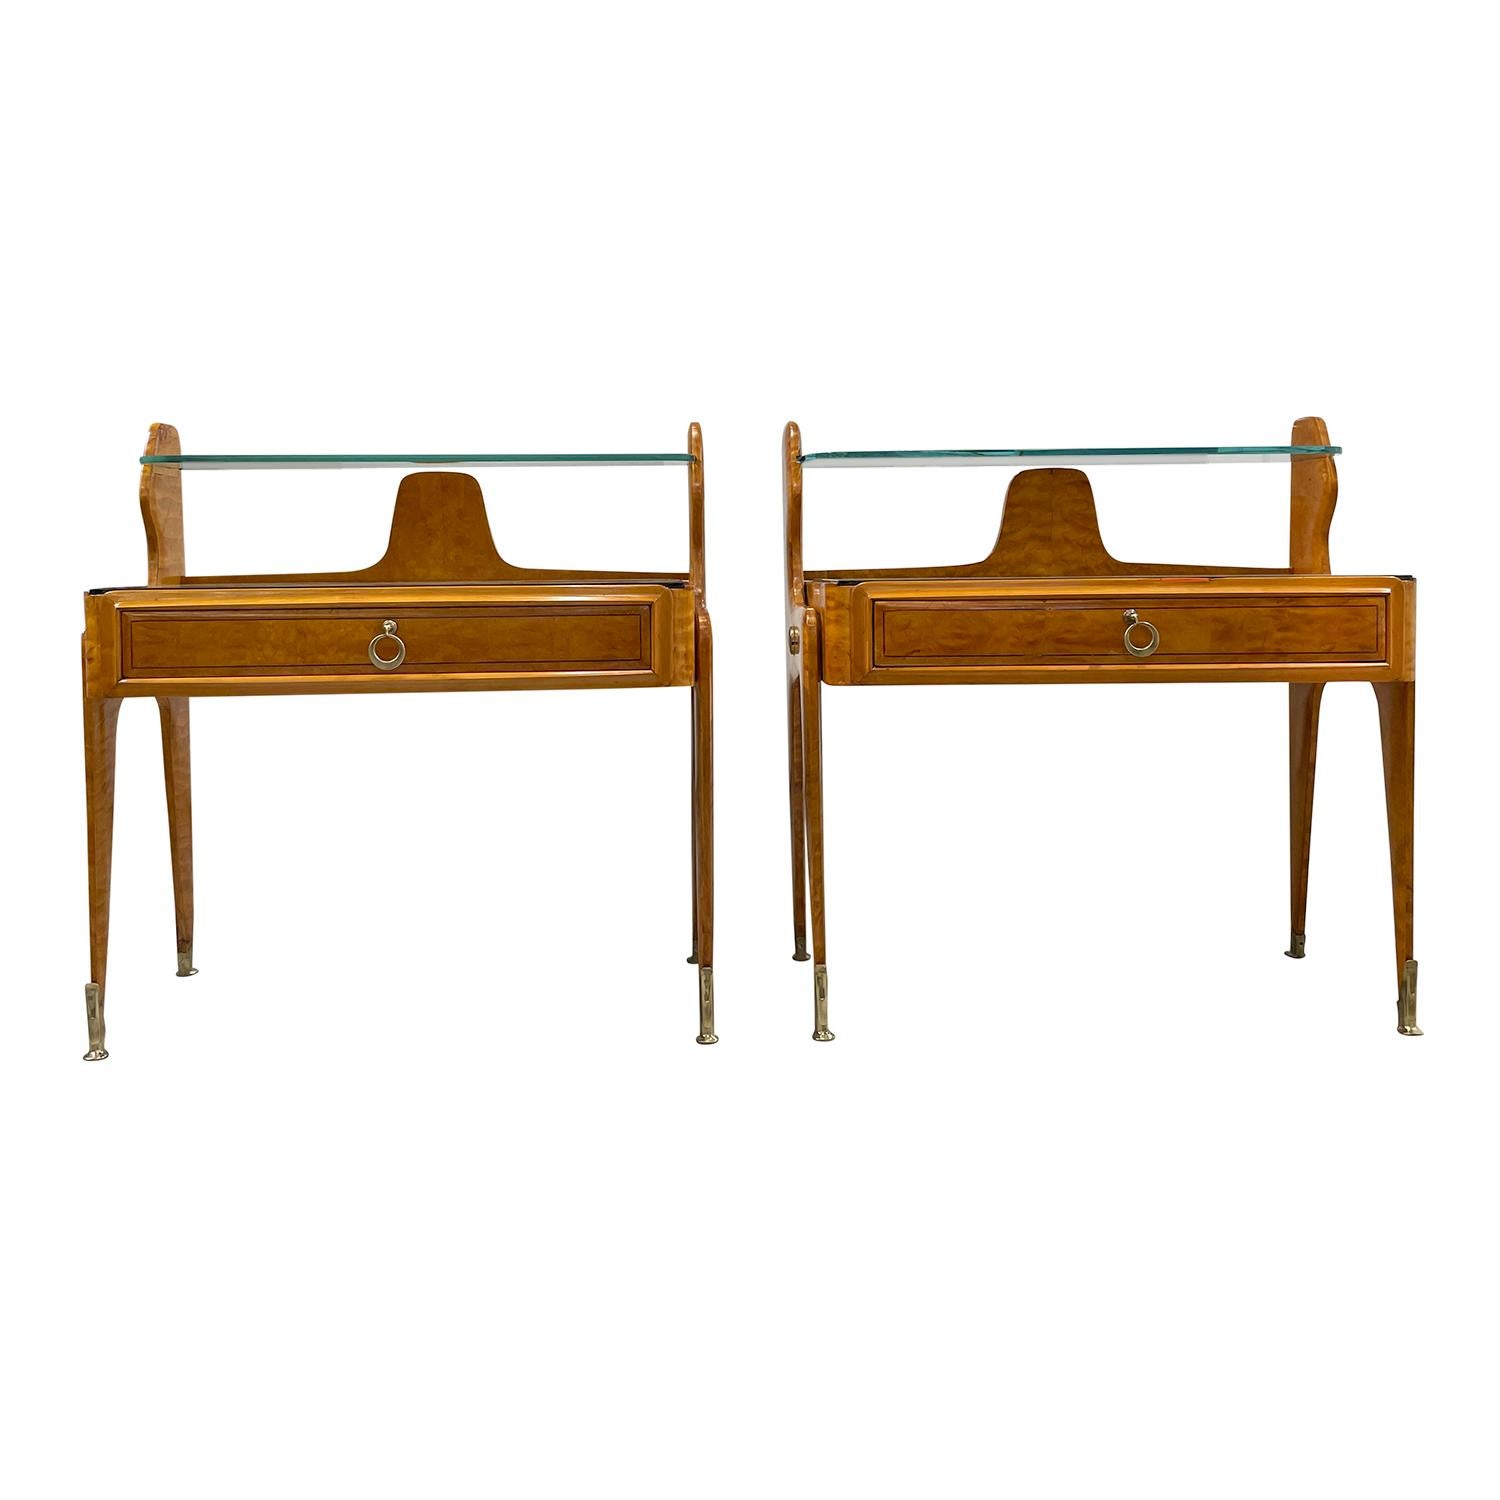 A vintage Mid-Century modern Italian pair of nightstands with a slim smoked glass top, made of hand crafted polished, partly veneered Maplewood, designed by Paolo Buffa in good condition. Each of the polished bed side tables are composed with a